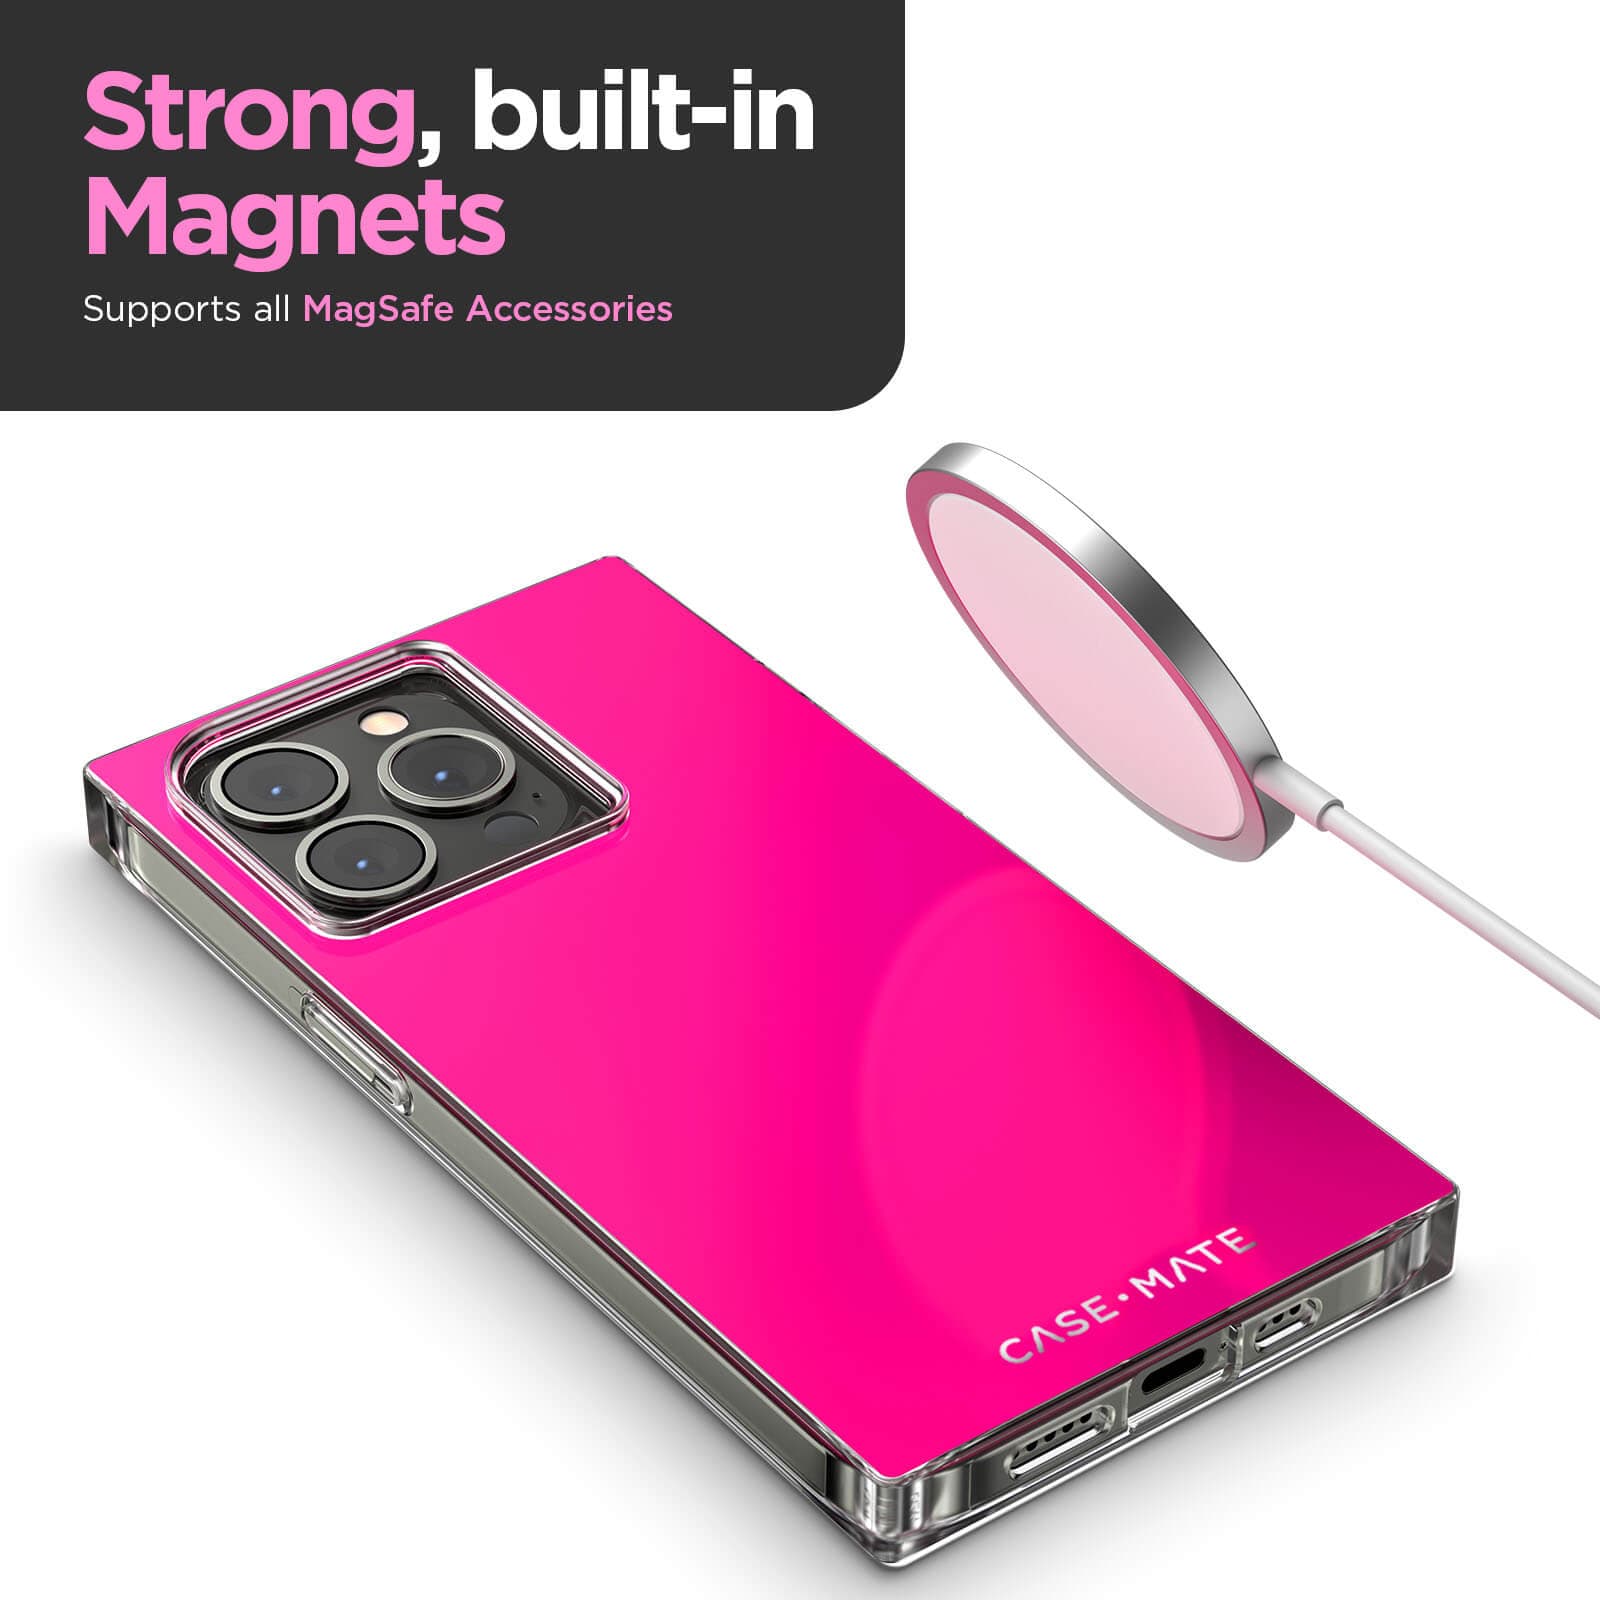 Strong, built-in magnets supports all MagSafe accessories. color::Hot Pink